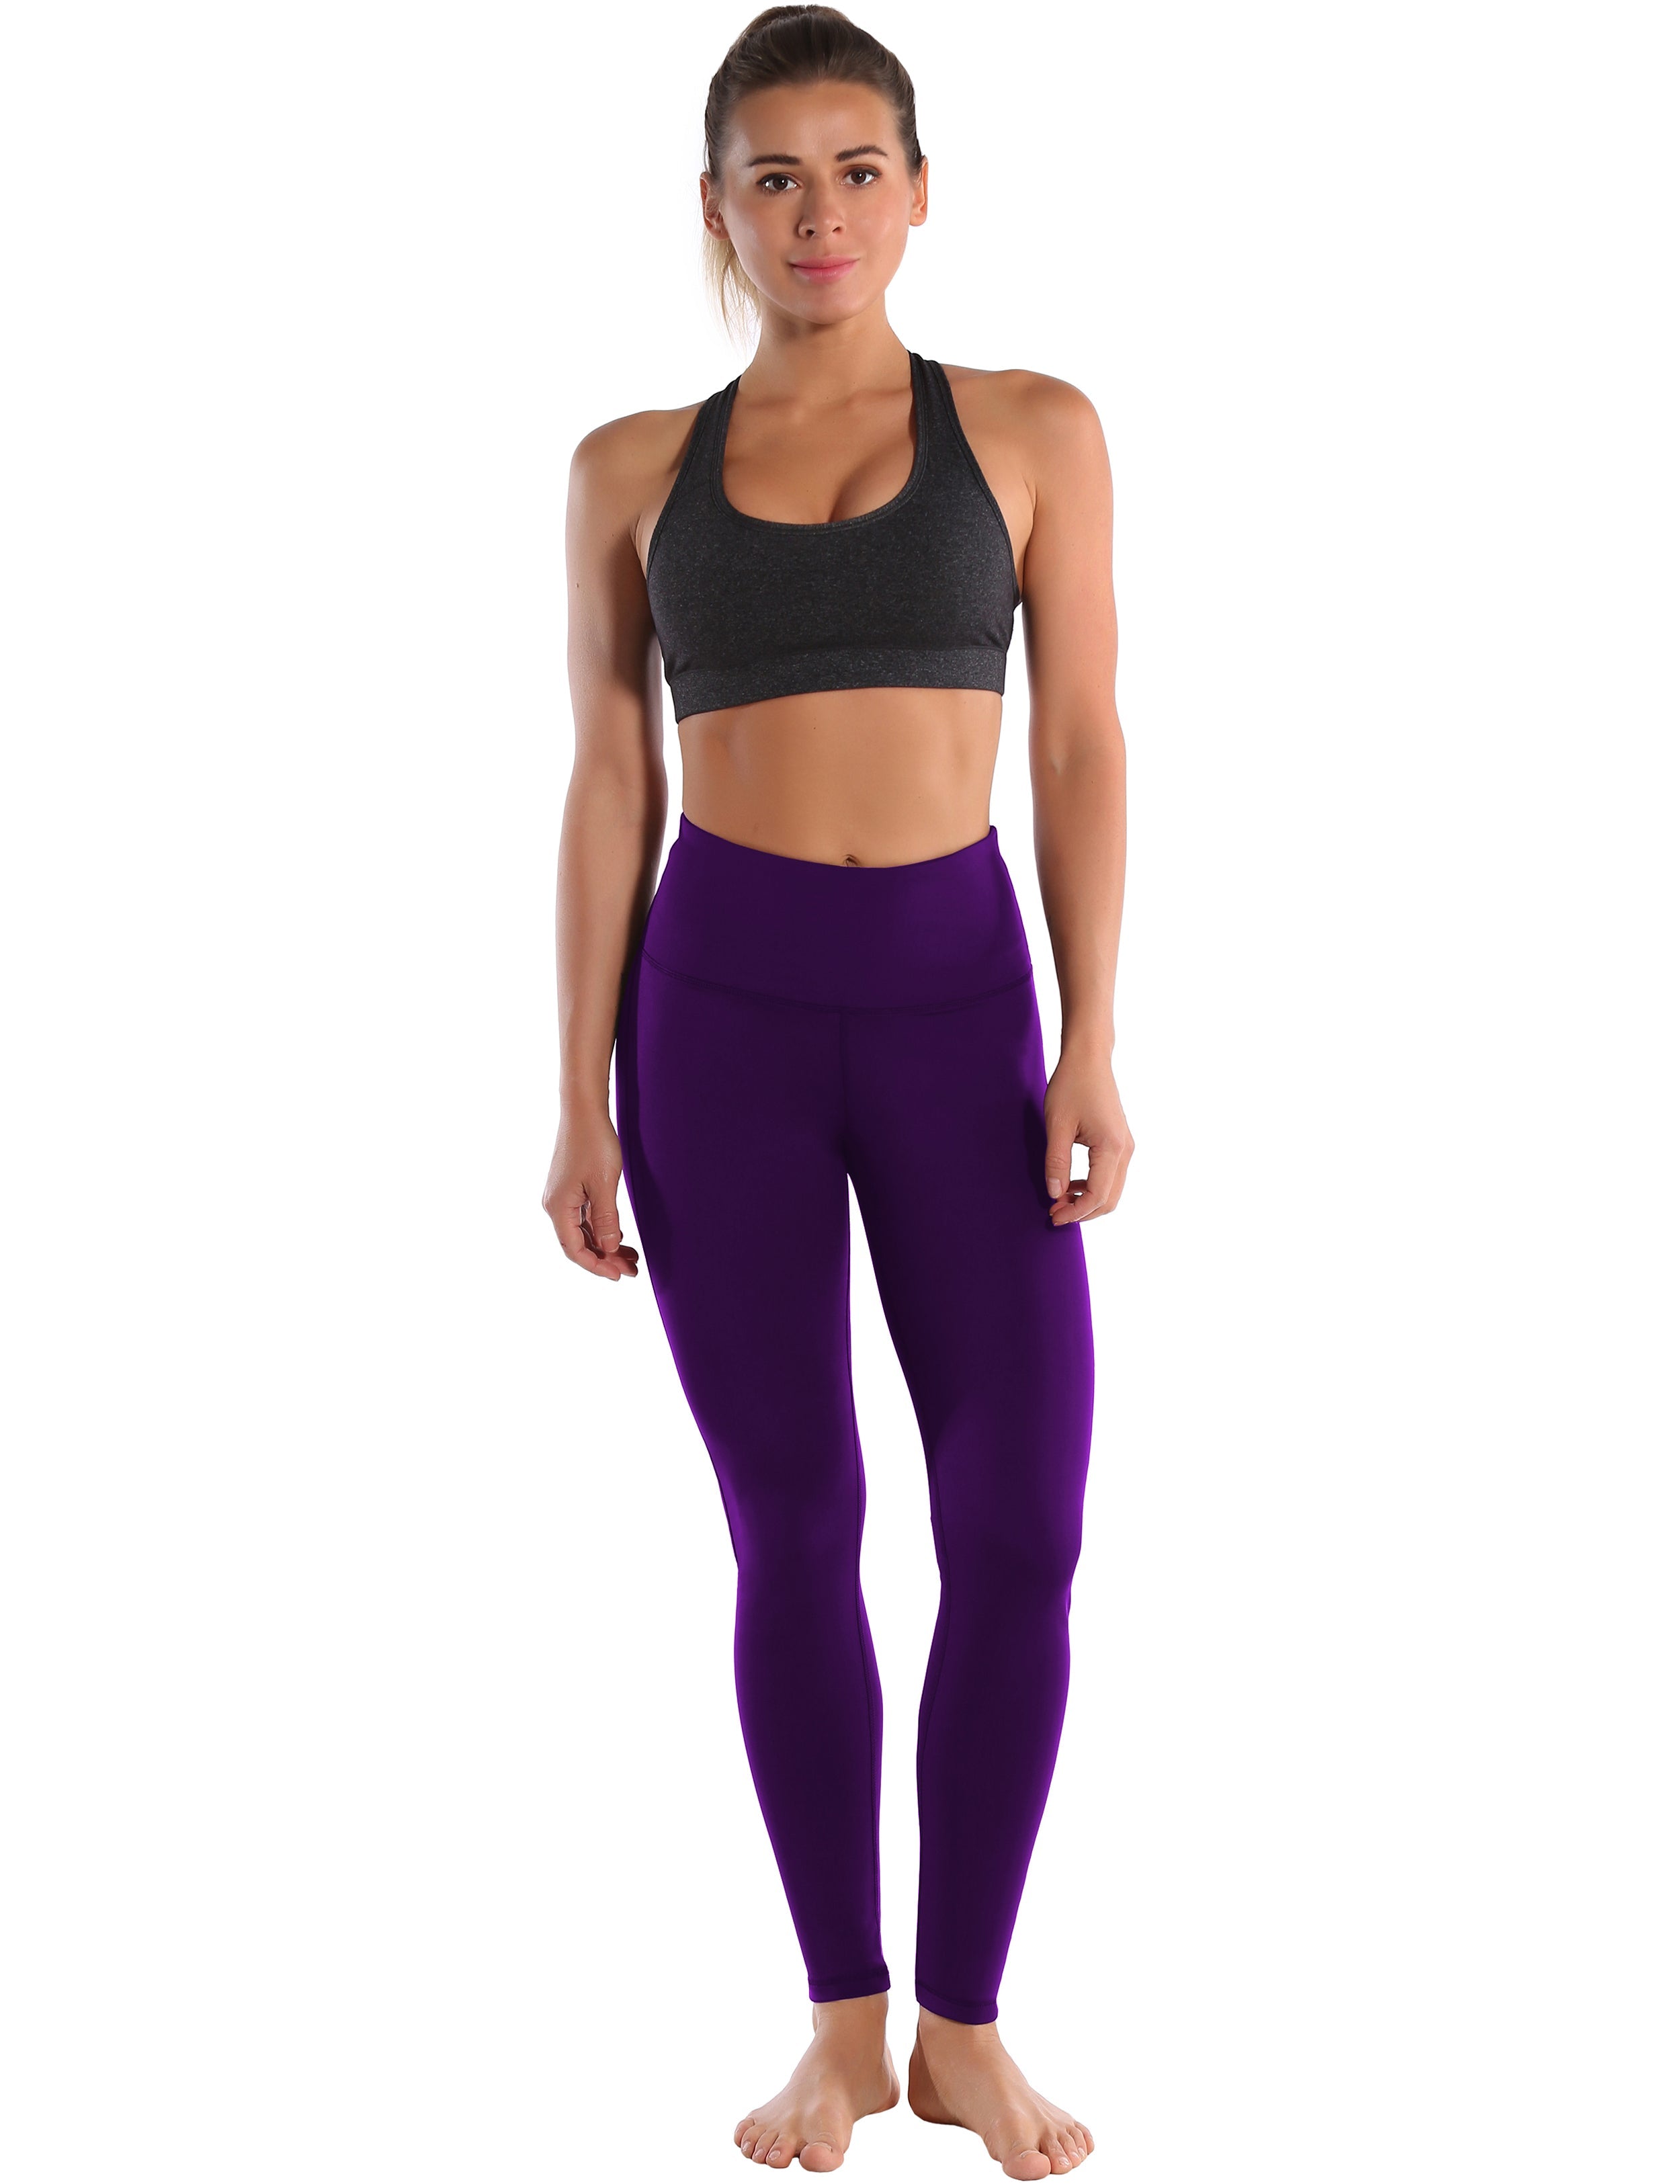 High Waist Side Line Pilates Pants eggplantpurple Side Line is Make Your Legs Look Longer and Thinner 75%Nylon/25%Spandex Fabric doesn't attract lint easily 4-way stretch No see-through Moisture-wicking Tummy control Inner pocket Two lengths